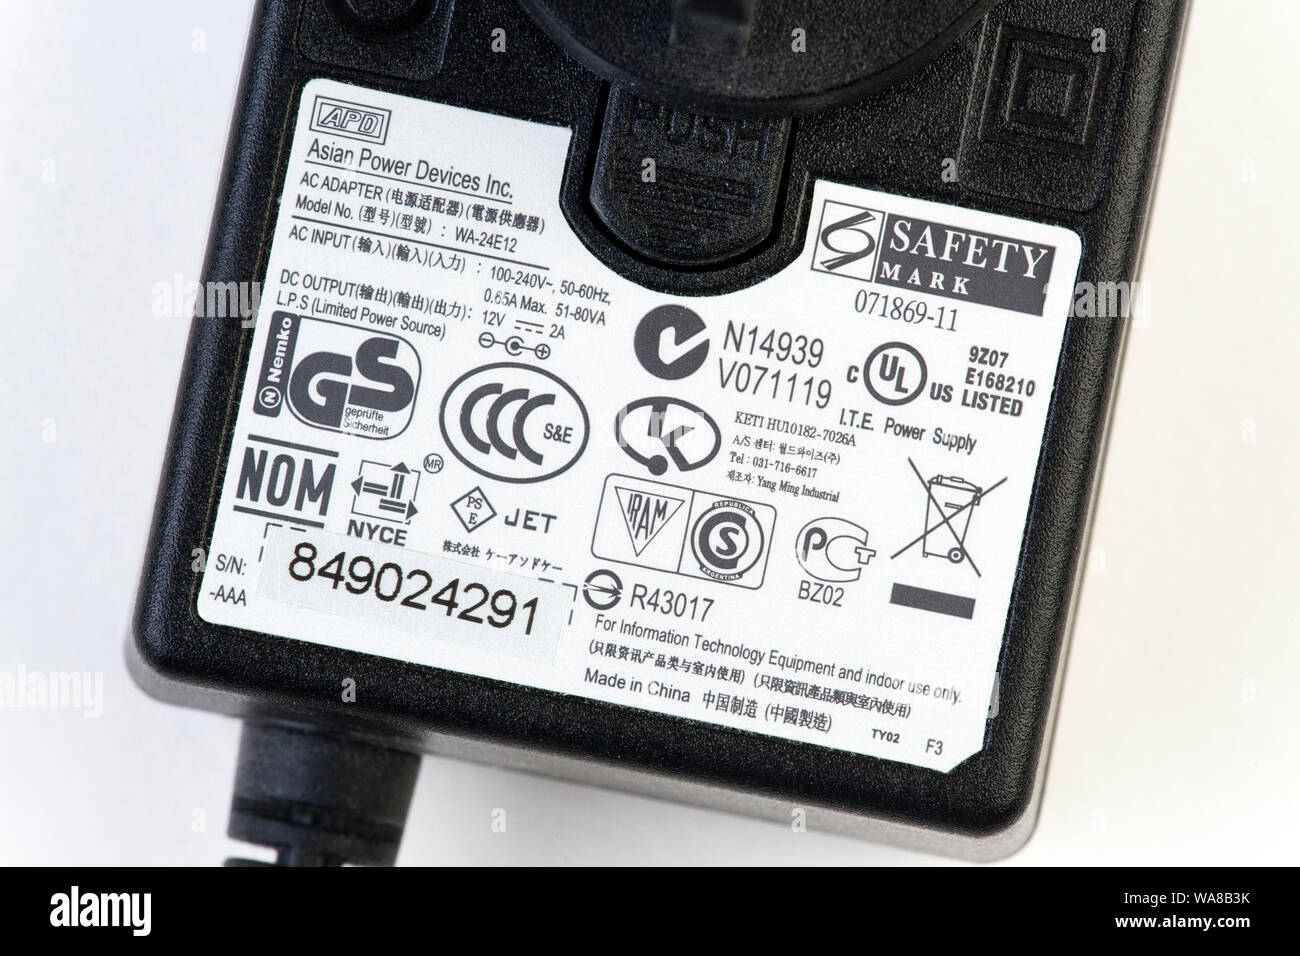 safety approvals label on electronic power supply adapter Stock Photo